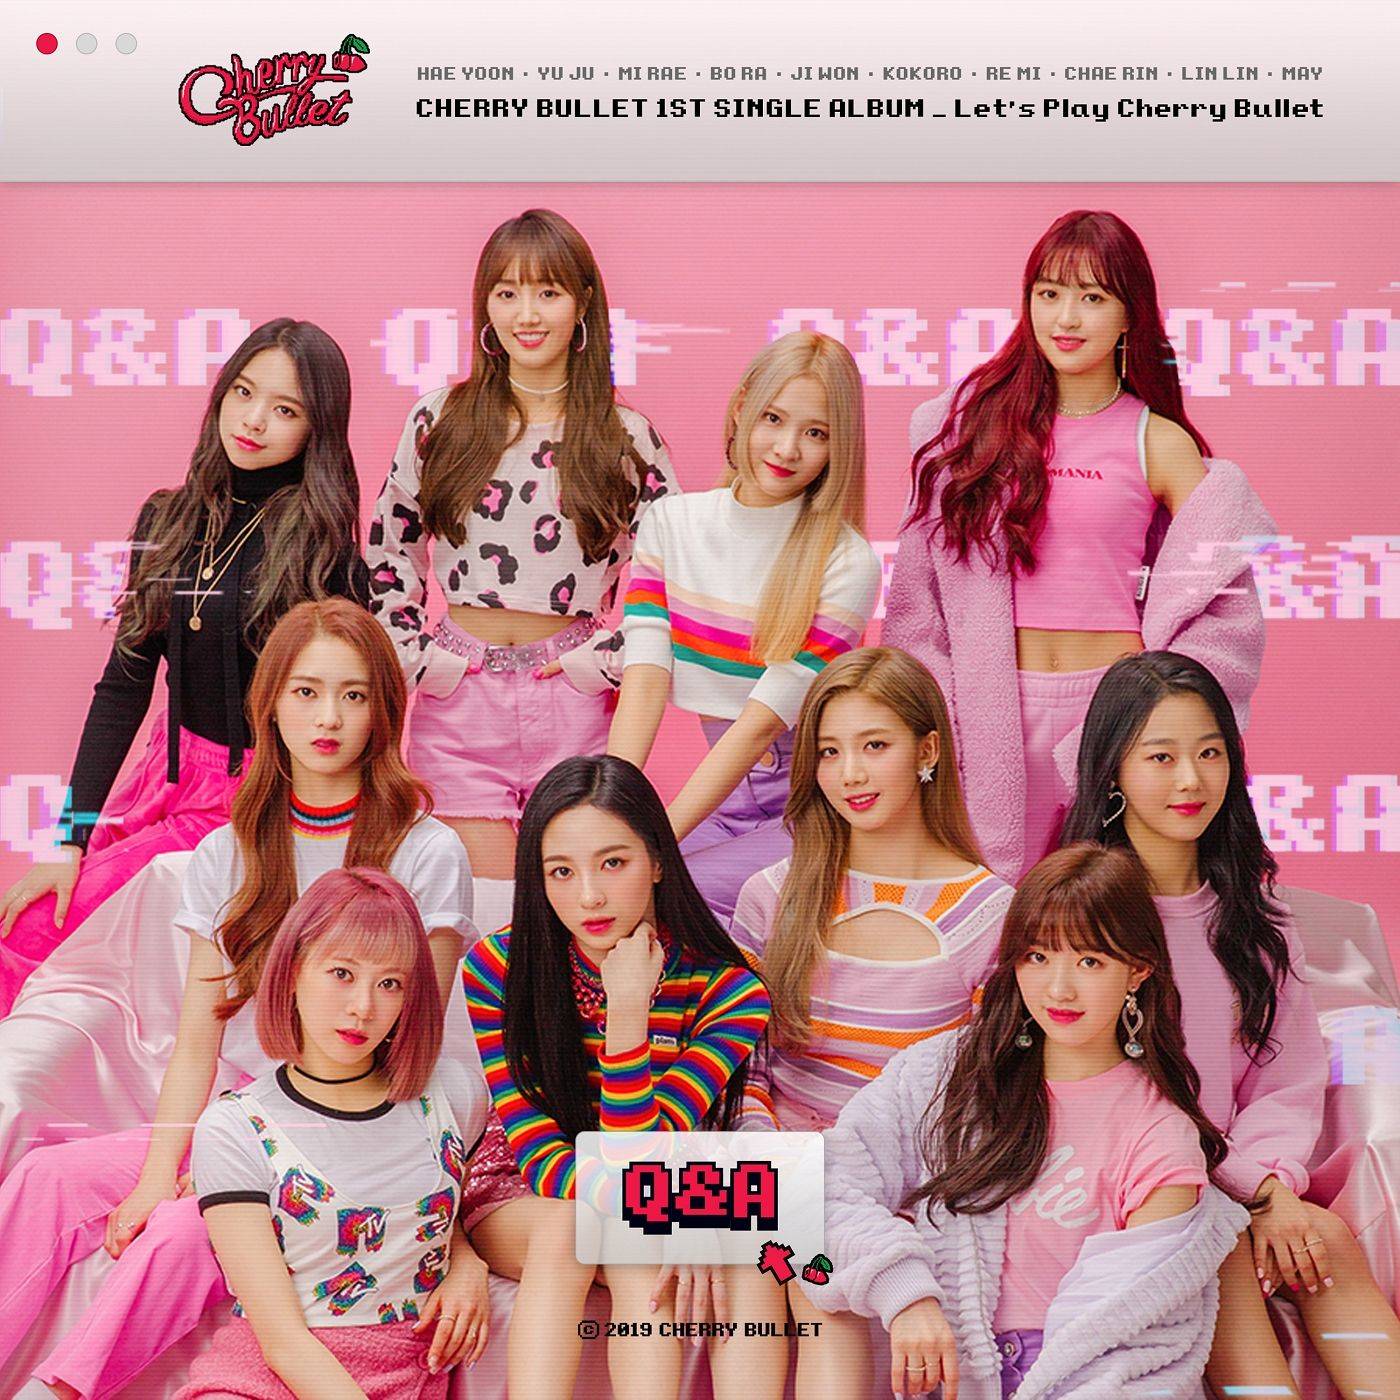 Let's Play Cherry Bullet (EP)